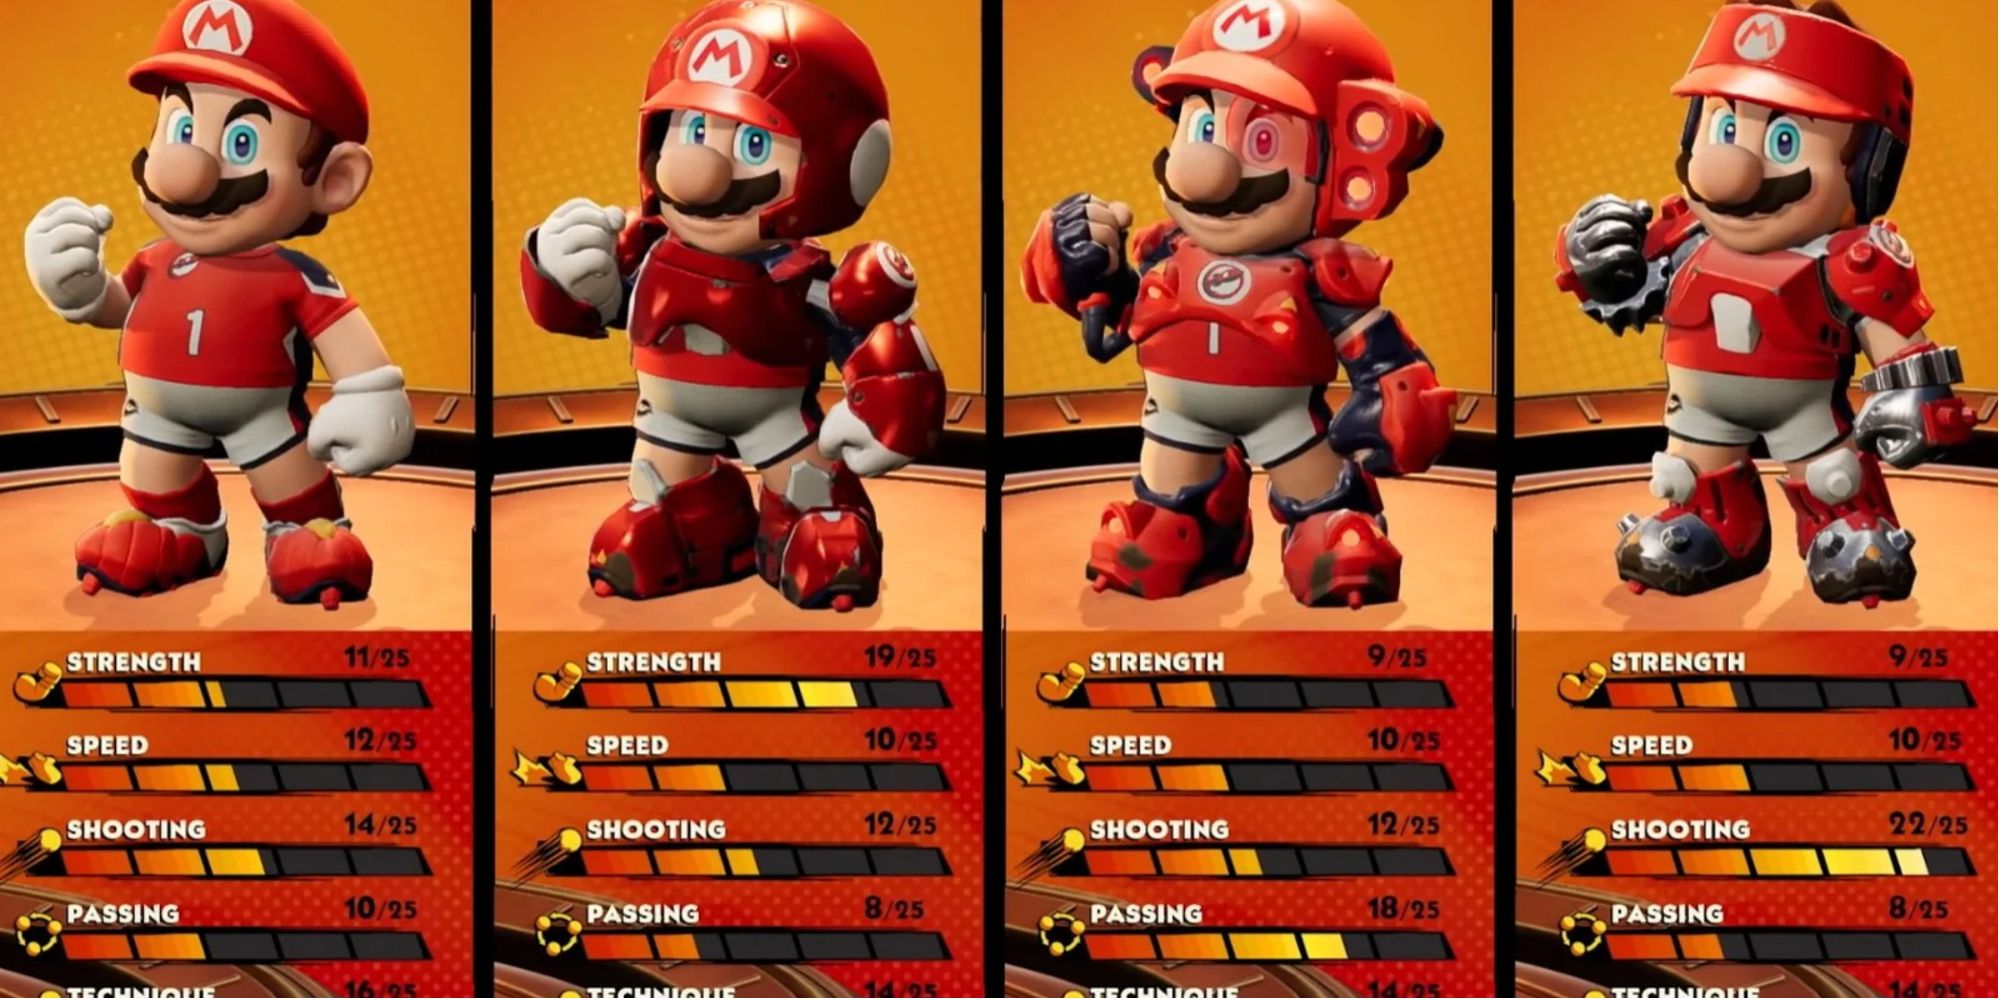 Mario Strikers gear selection is a risky place to experiment